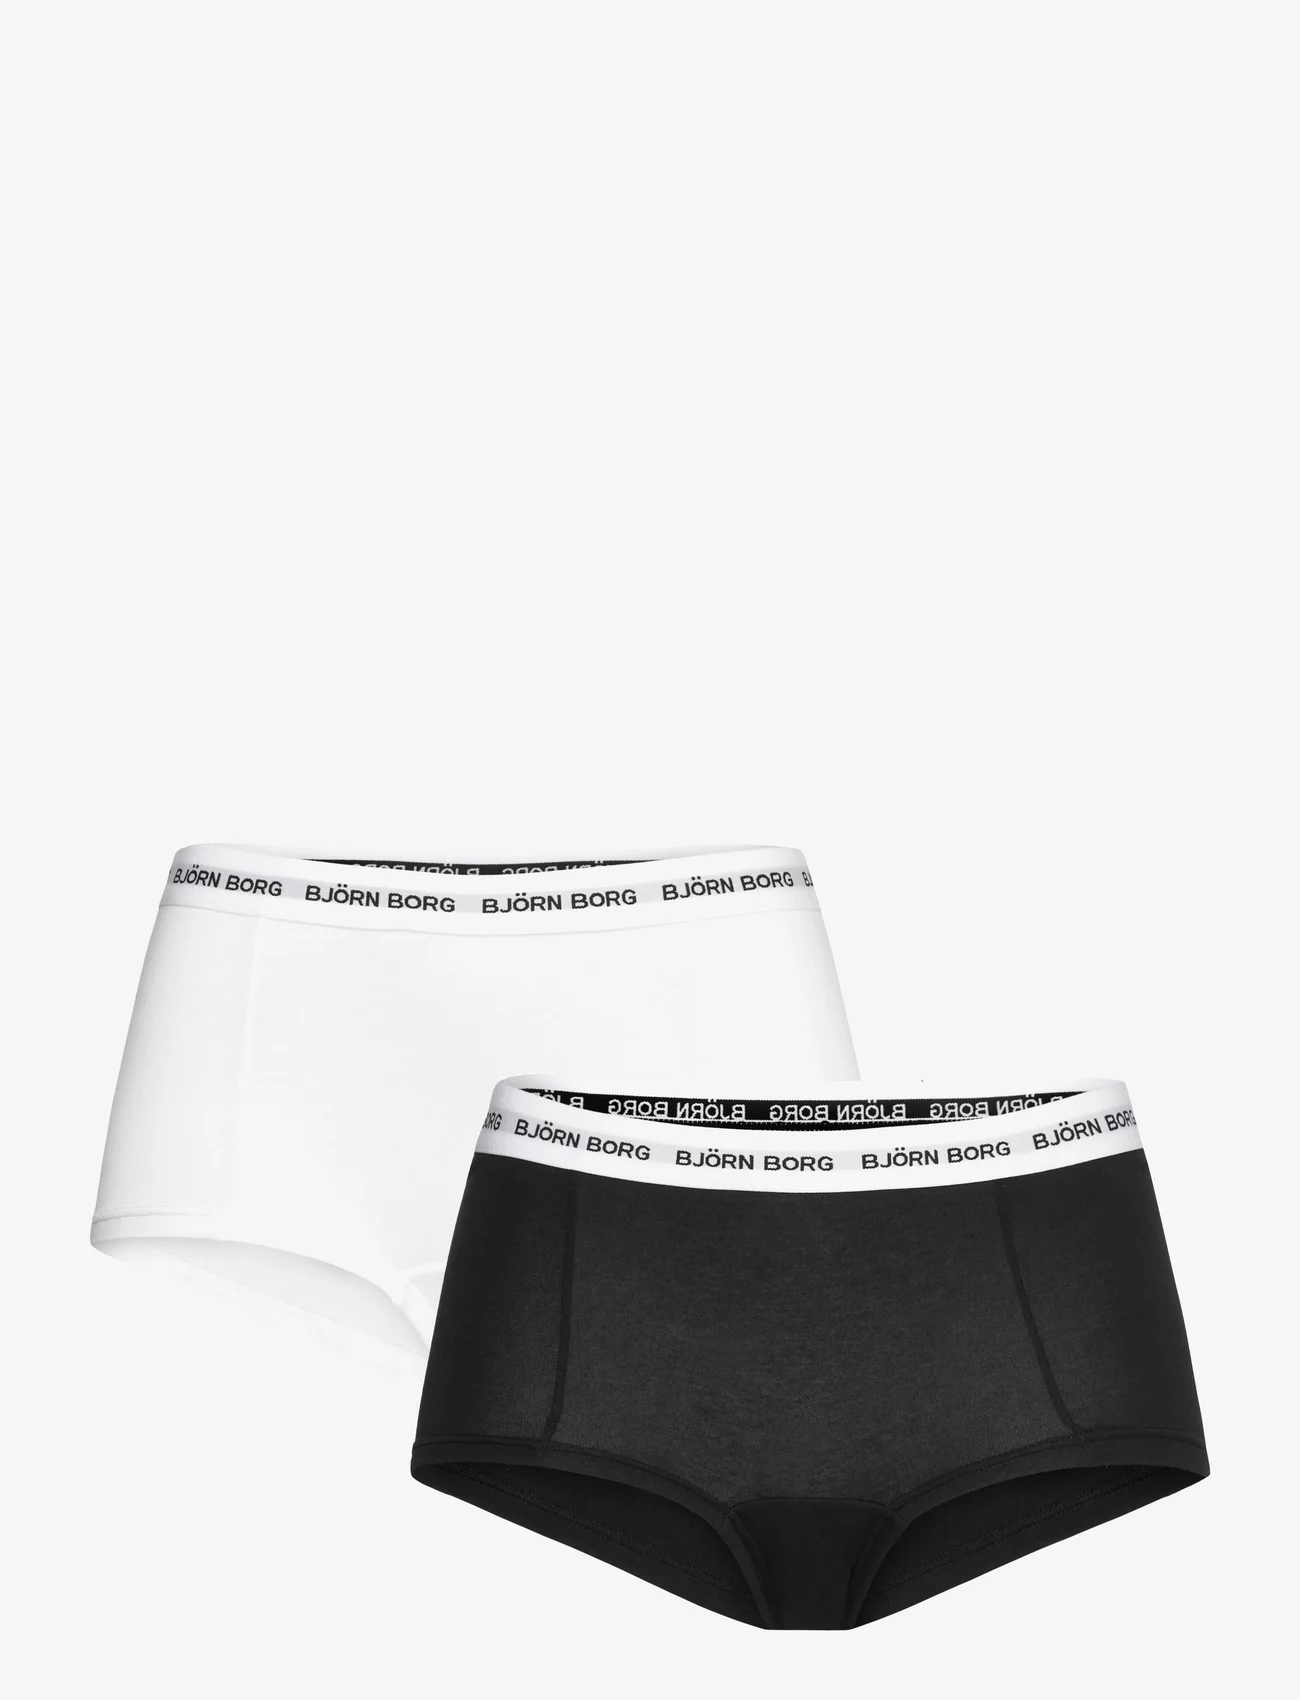 Björn Borg - CORE LOGO MINISHORTS 2p - lowest prices - multipack 1 - 0